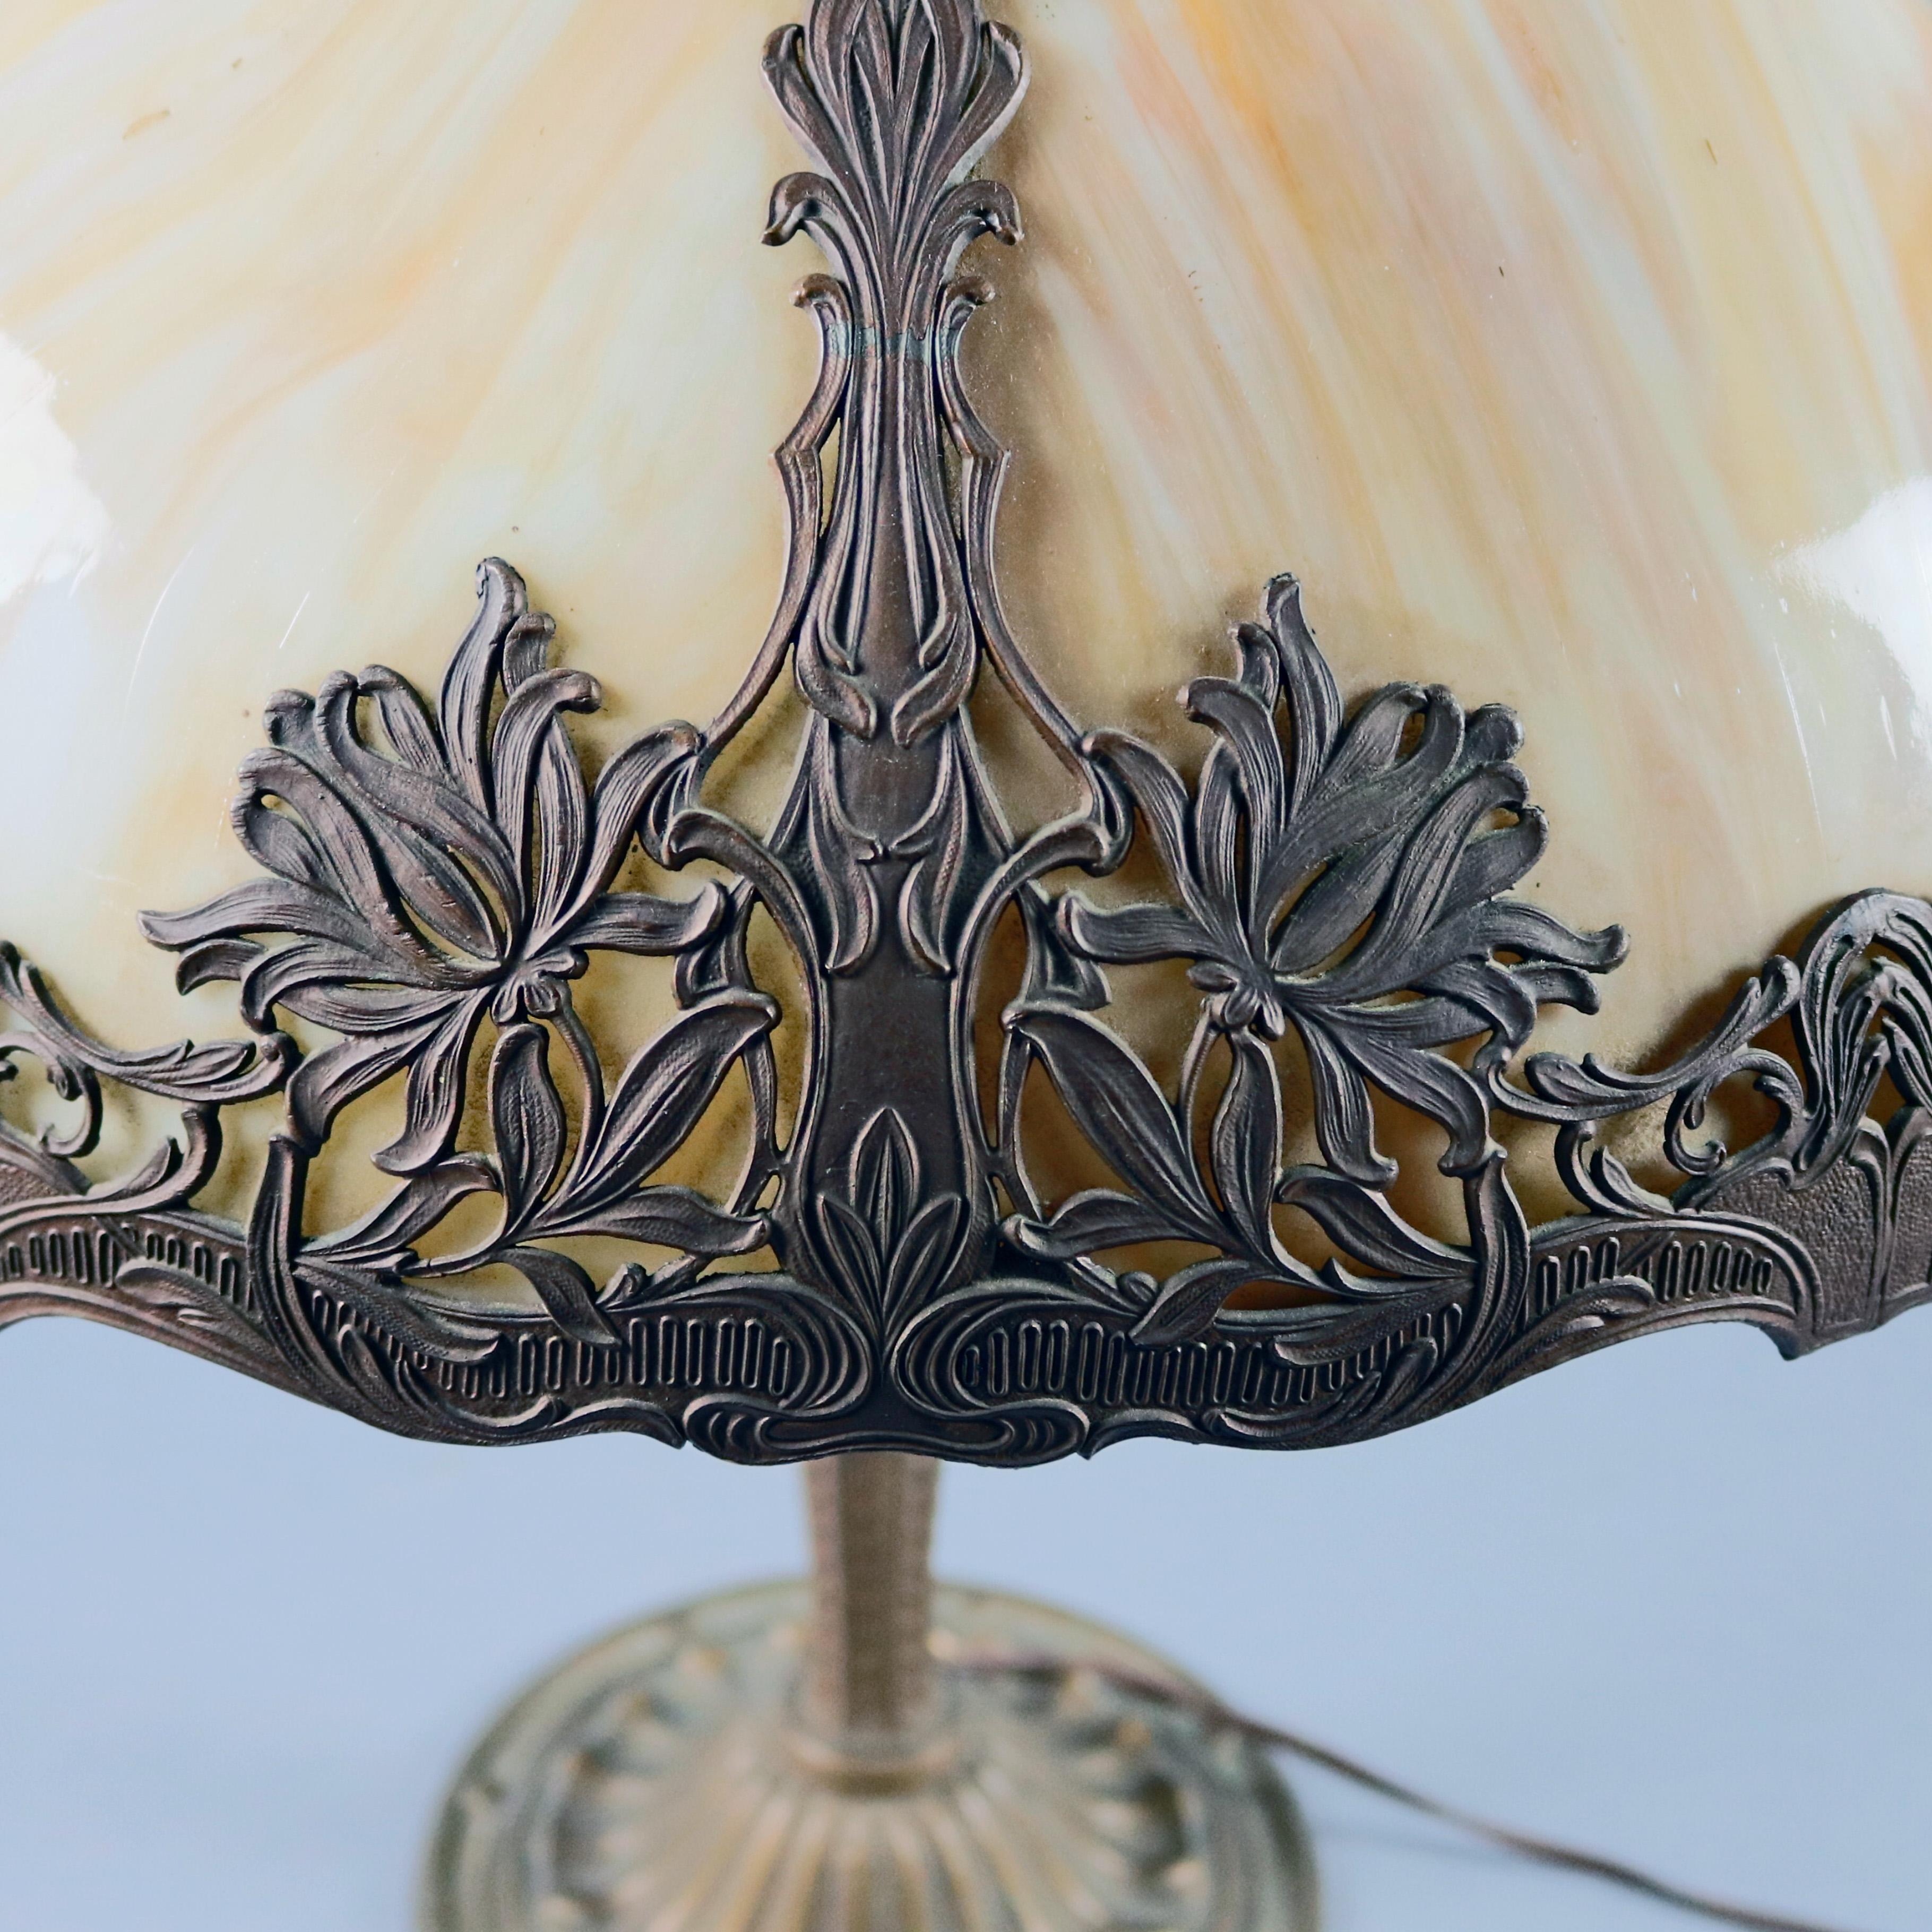 Antique Arts and Crafts era Bradley & Hubbard table lamp features stylized foliate double socket cast base, dome form shade with cast filigree shade having foliate and floral decoration and six bent slag glass panels, transitioning to art Nouveau,